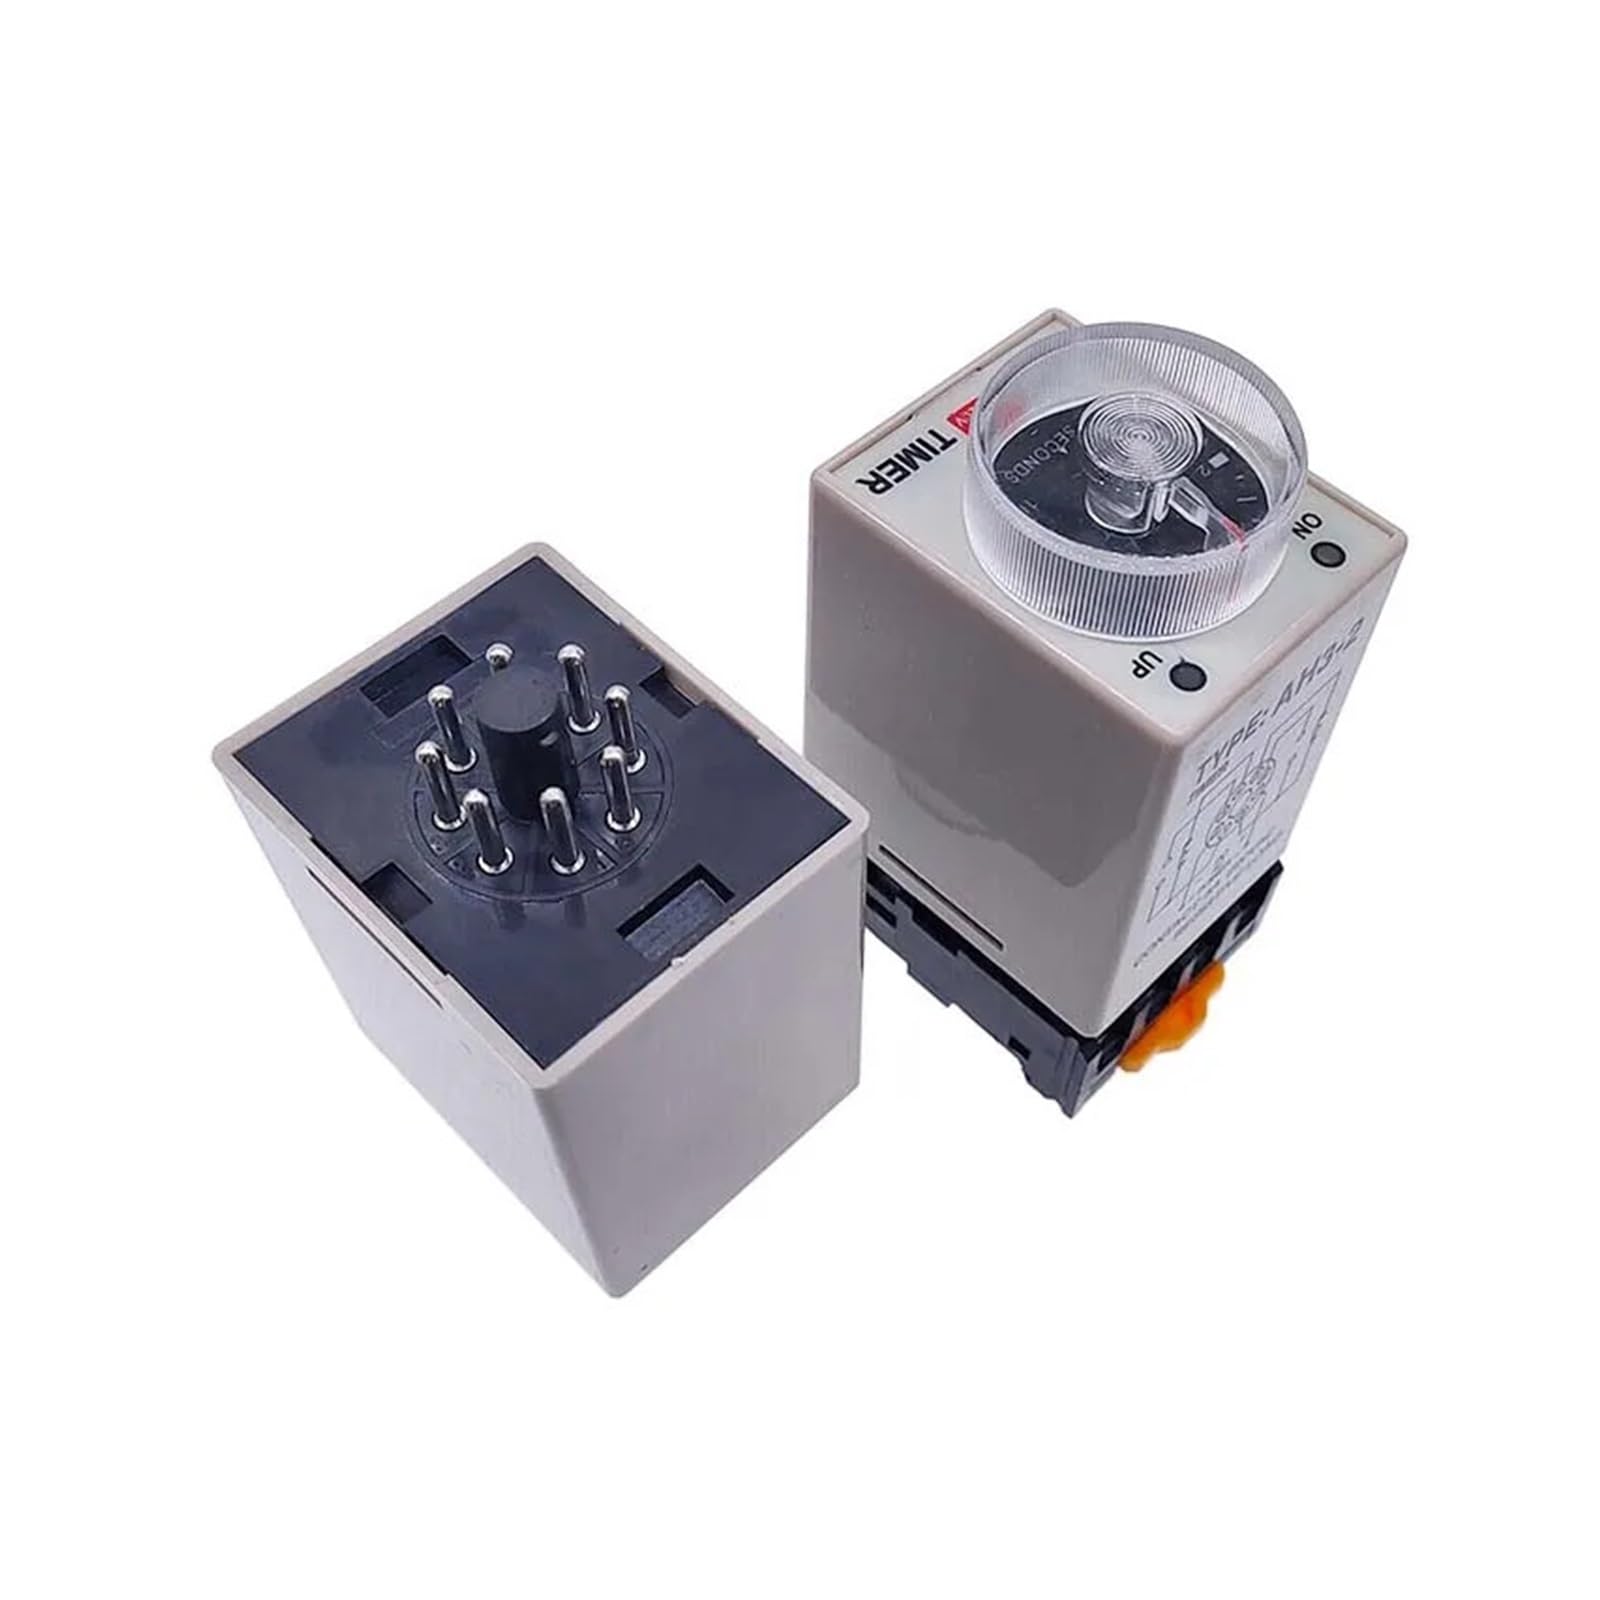 1 PC AH3-2 Power-on Delay Timer AH3-3 Time Relay AC Thick Stitch Time Set Range 1S/5S/10S/30S/60S/5M/10M/30M OSBCMZGE(AC380V,AH3-3 0-3Minutes) von OSBCMZGE